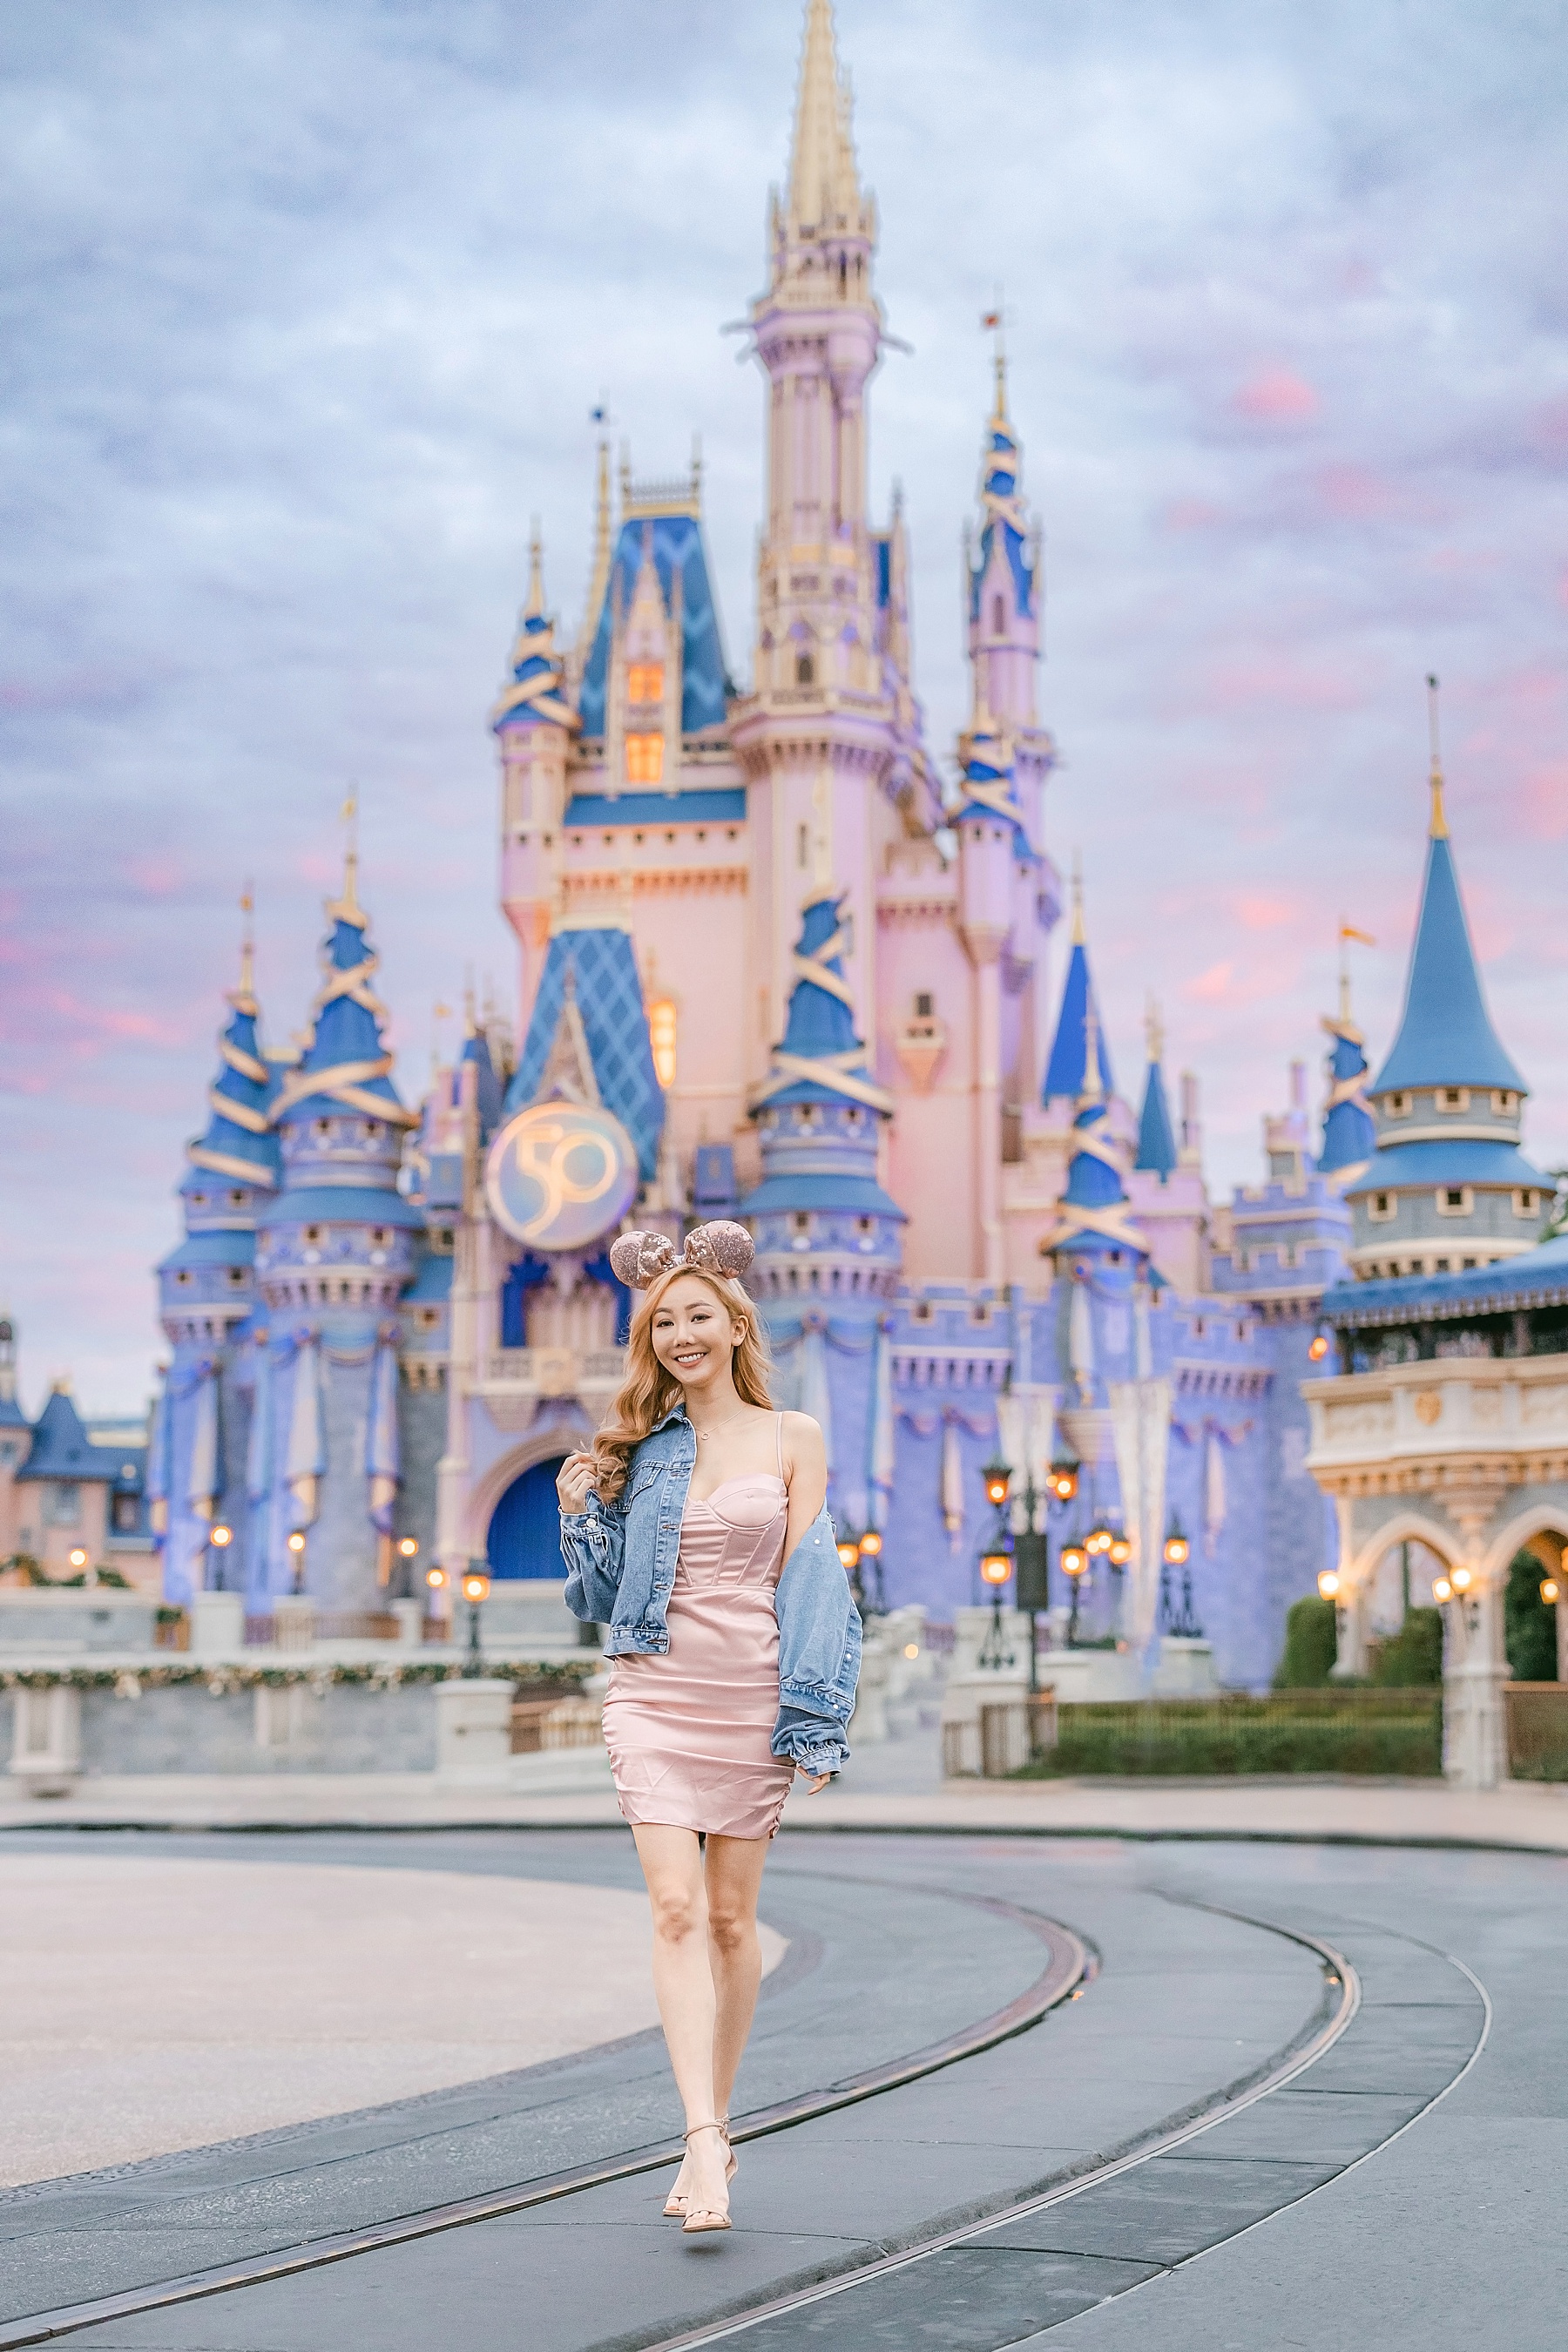 woman in pink dress and heels standing in front of Cinderella's Castle at Walt Disney World Magic Kingdom Orlando Florida